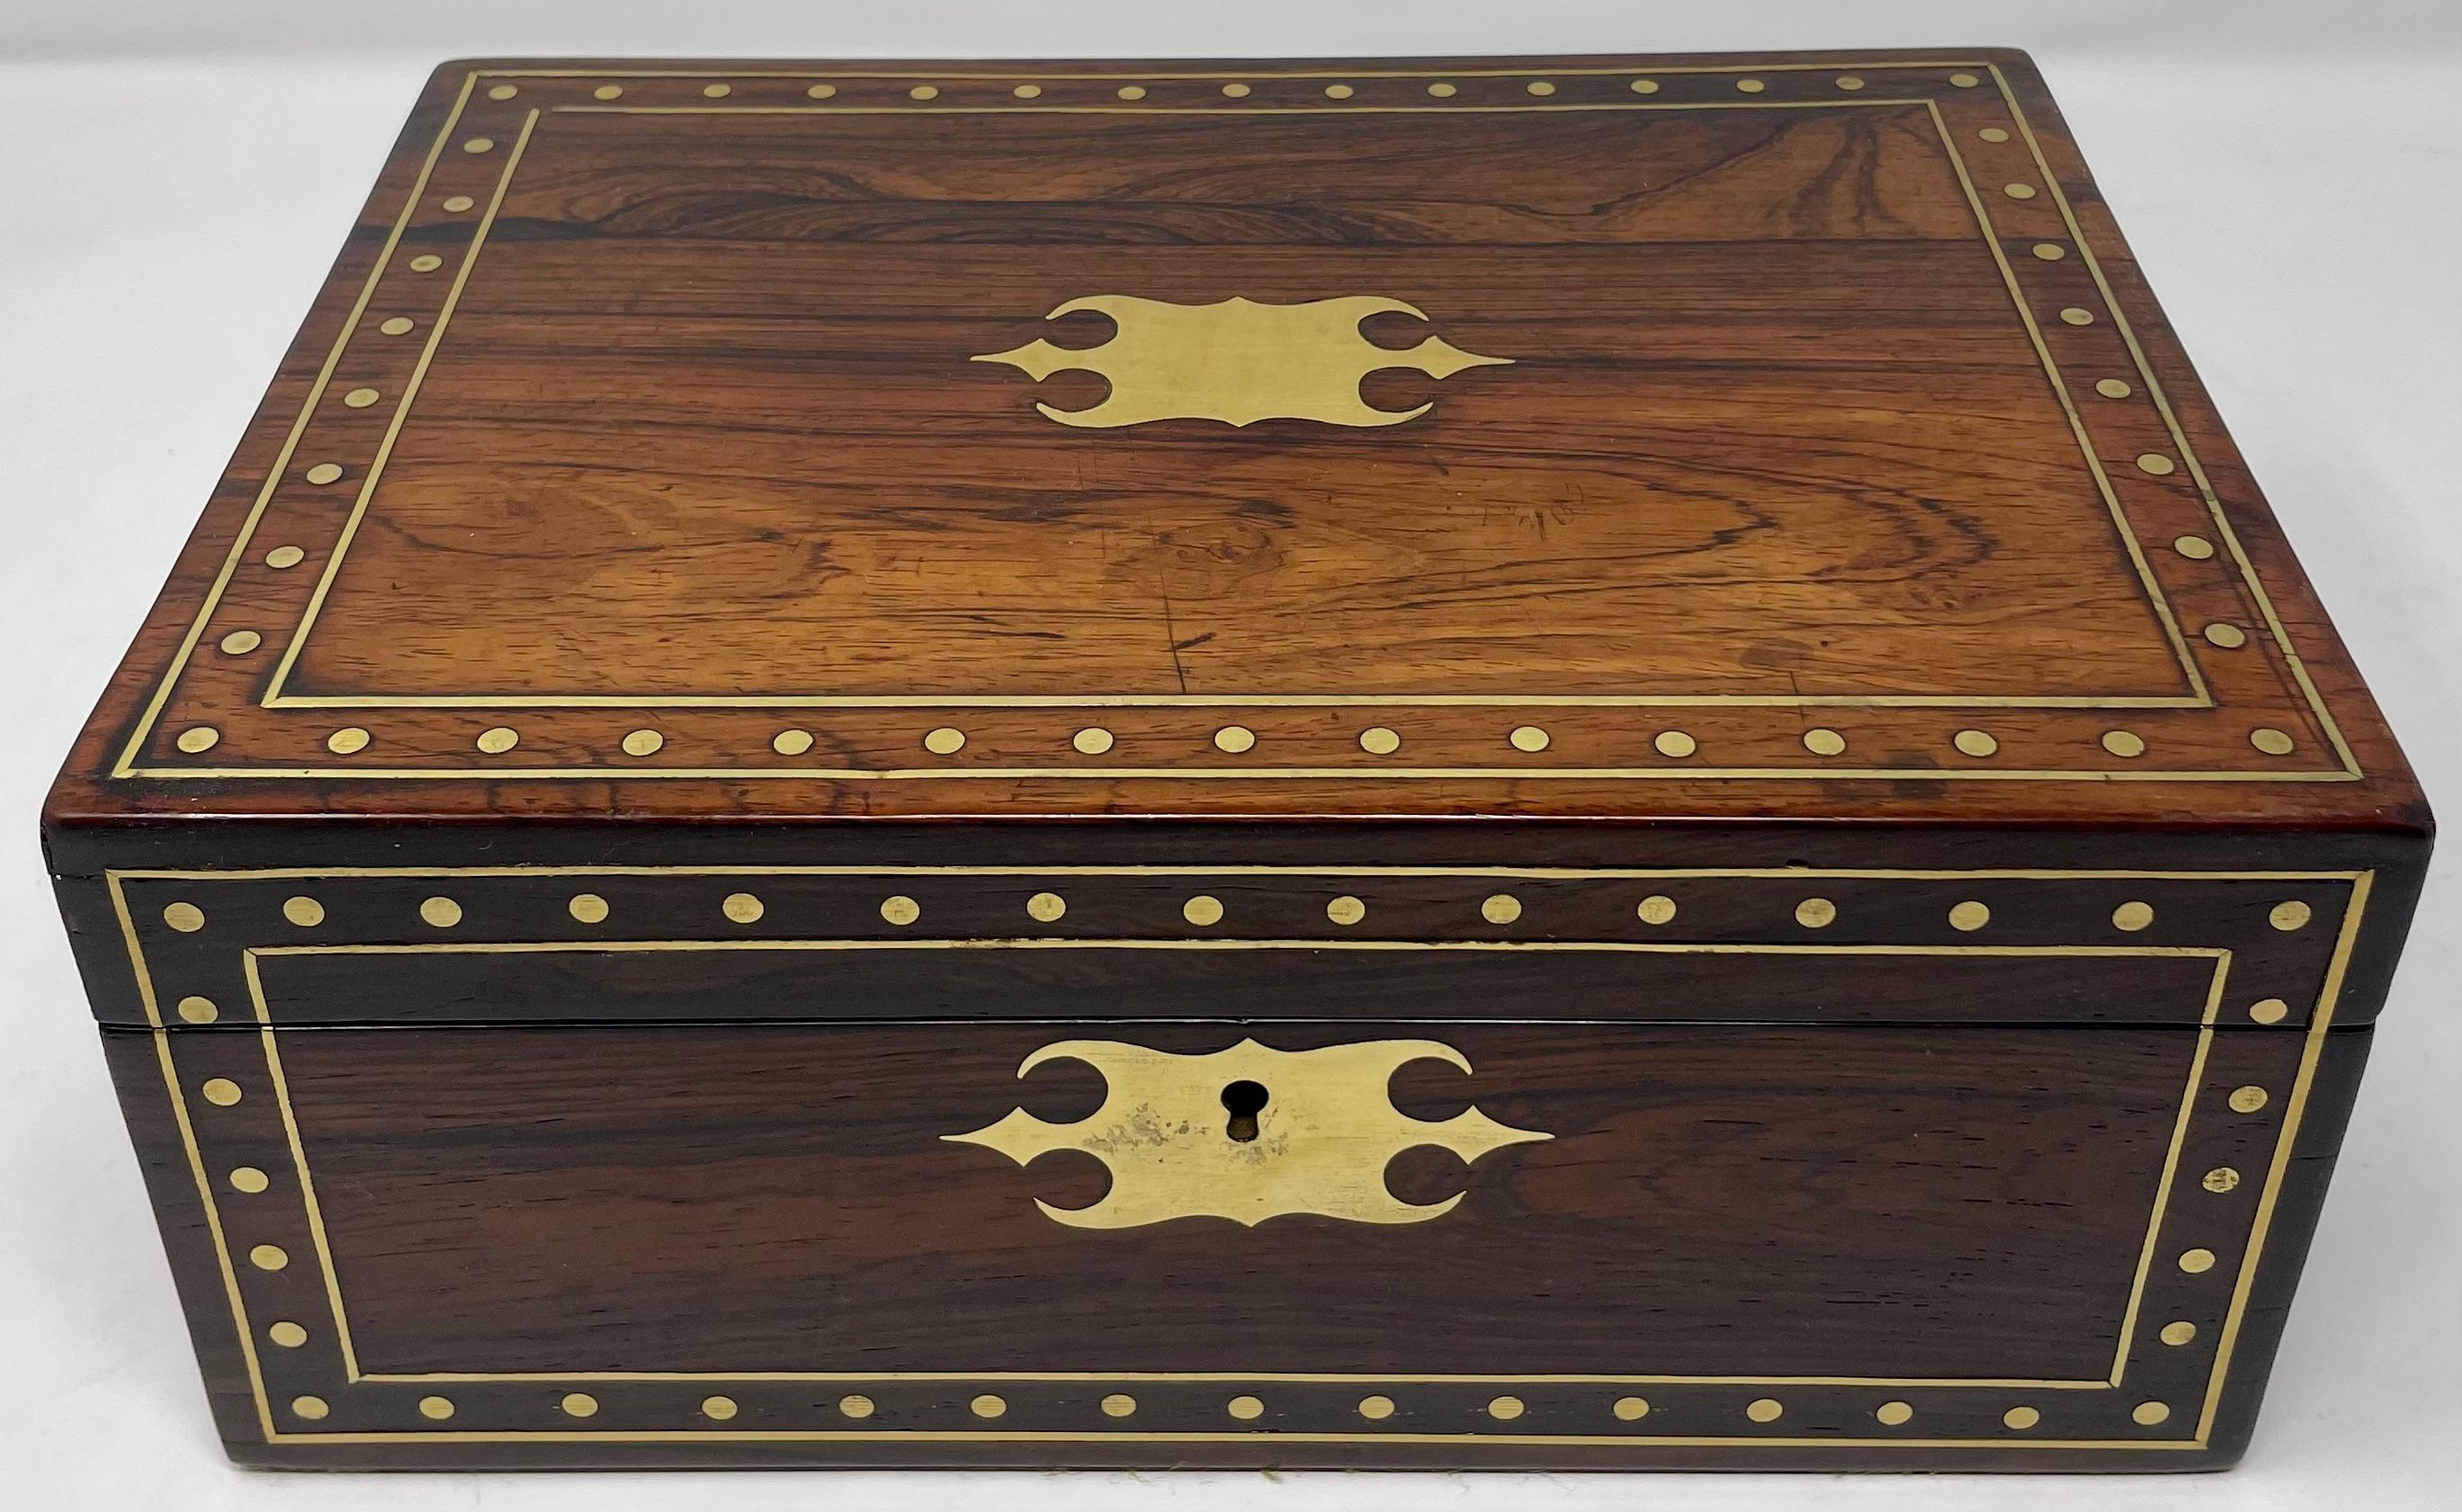 19th Century Antique English Regency Period Rosewood Inlaid Box, Circa 1820. For Sale